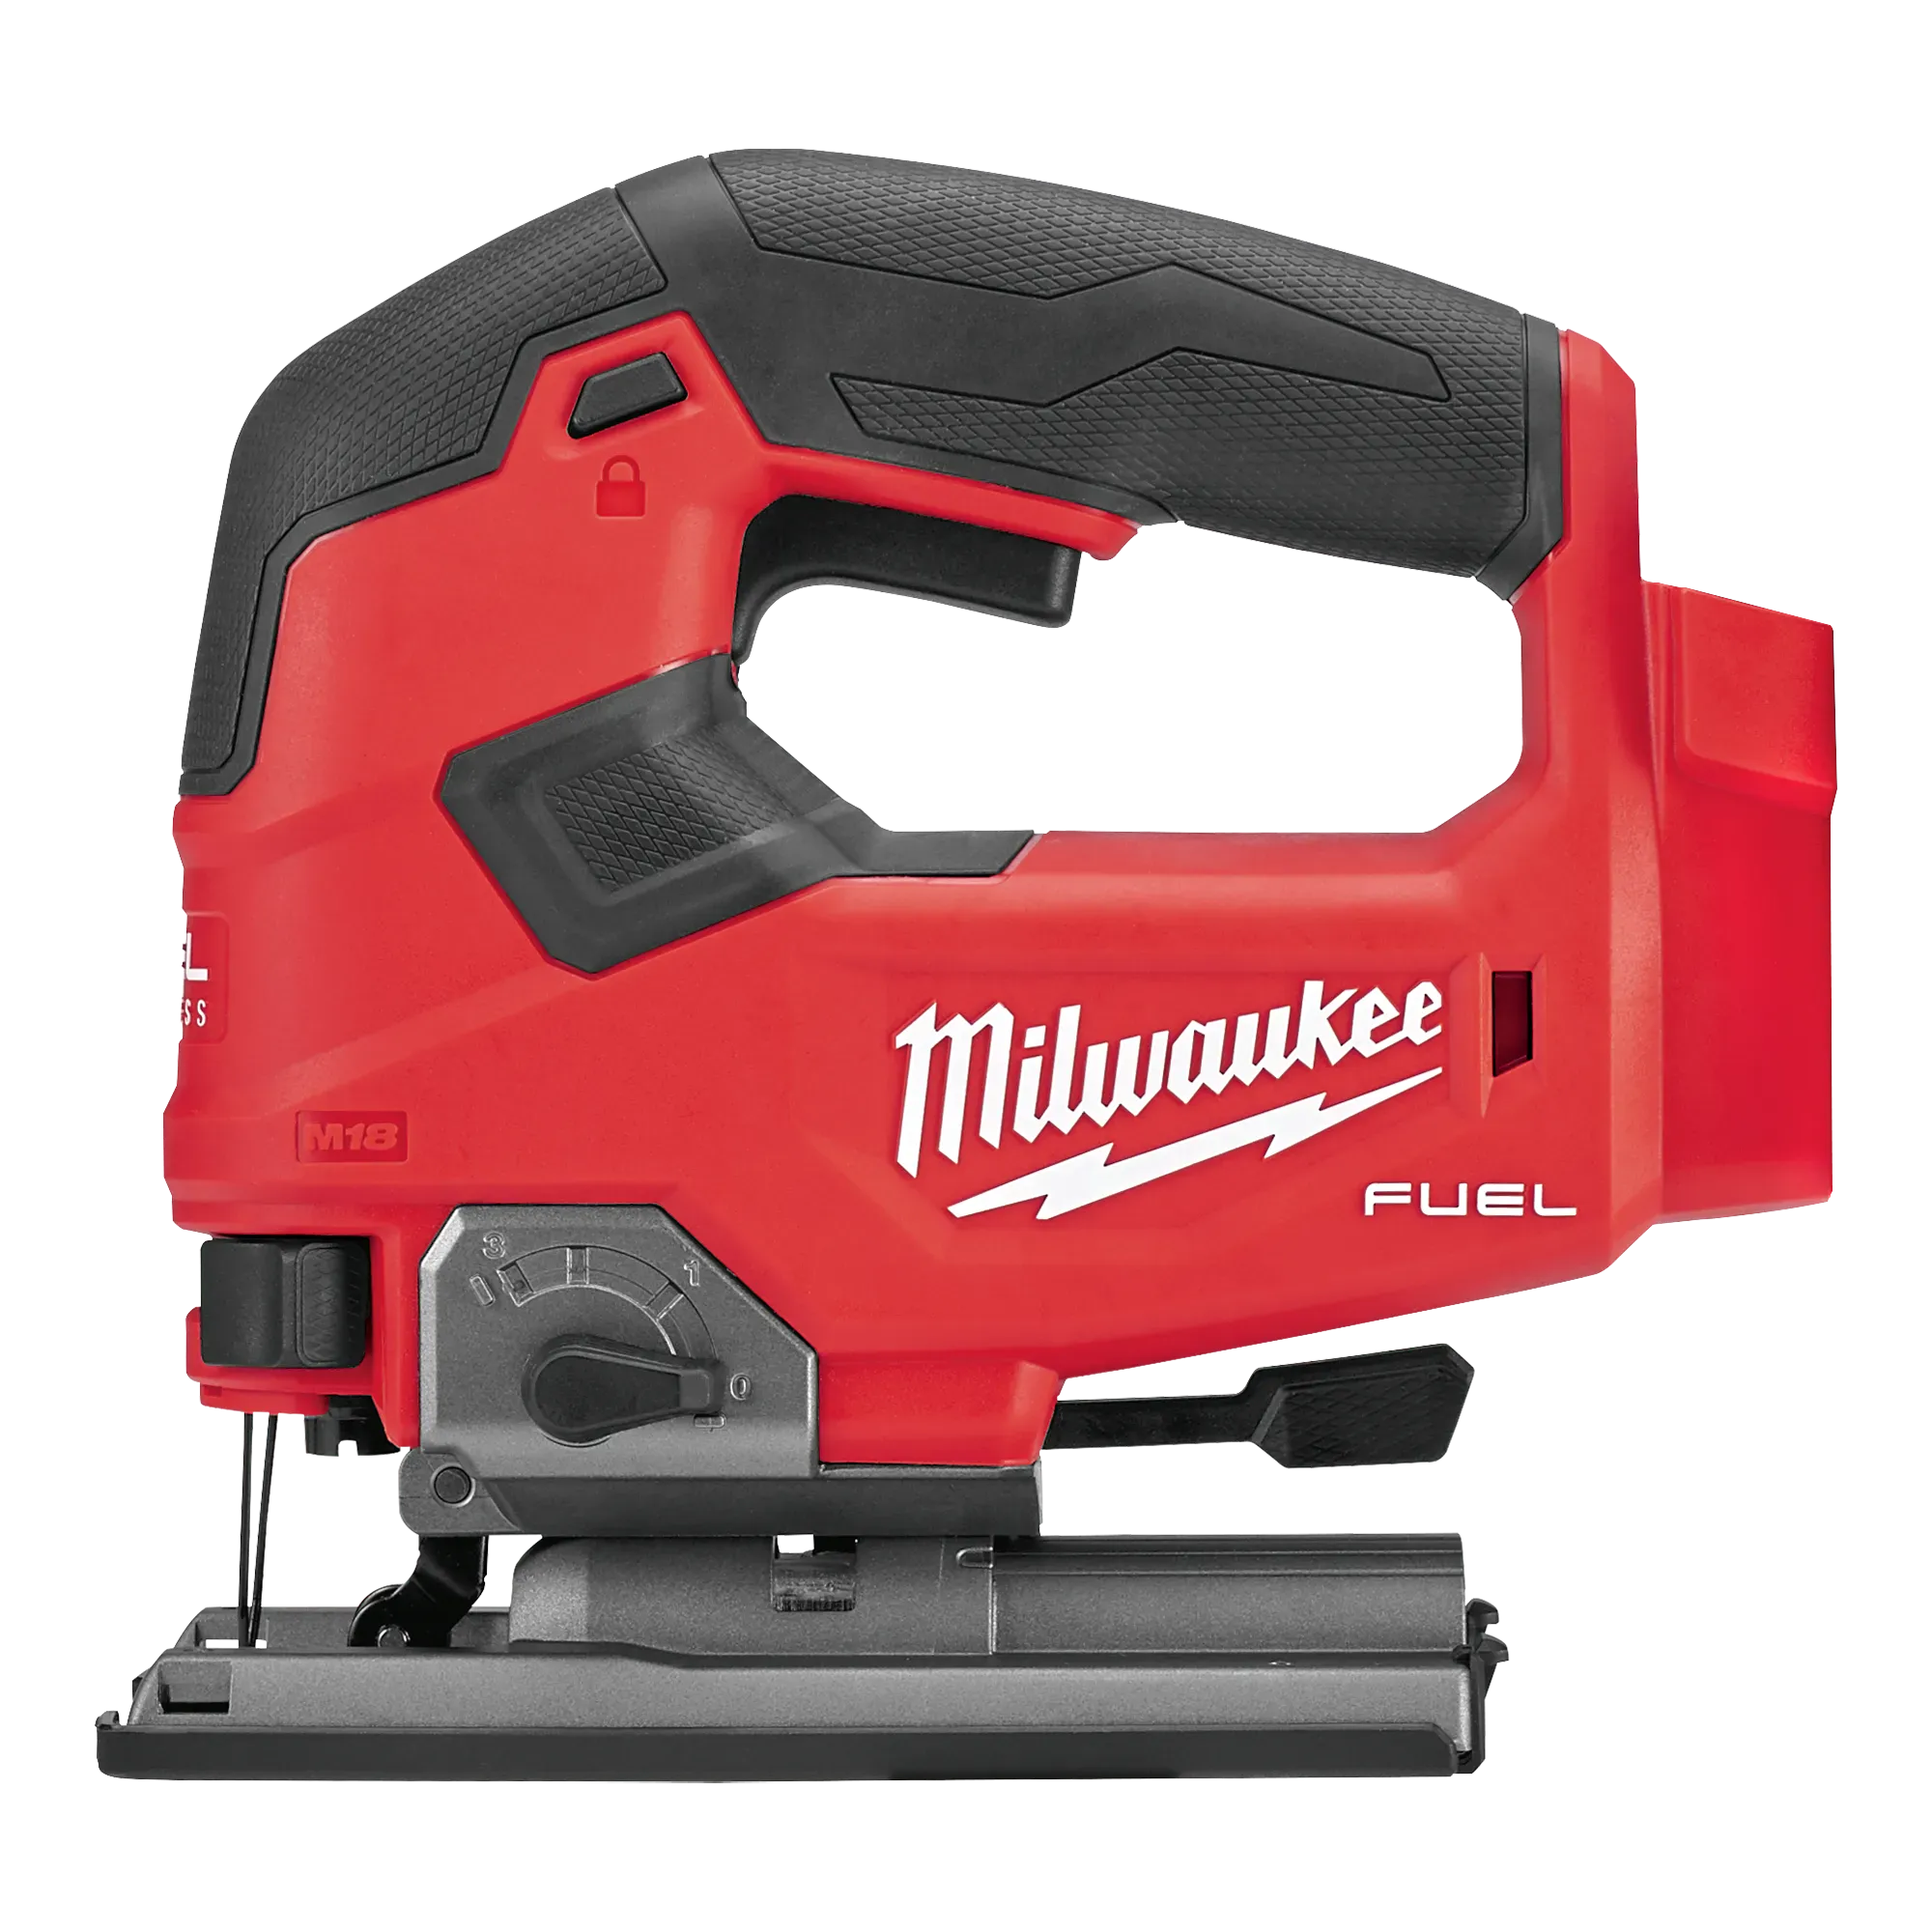 M18 FUEL 18V Lithium-Ion Brushless Cordless Jig Saw (Tool-Only) (2737-20)